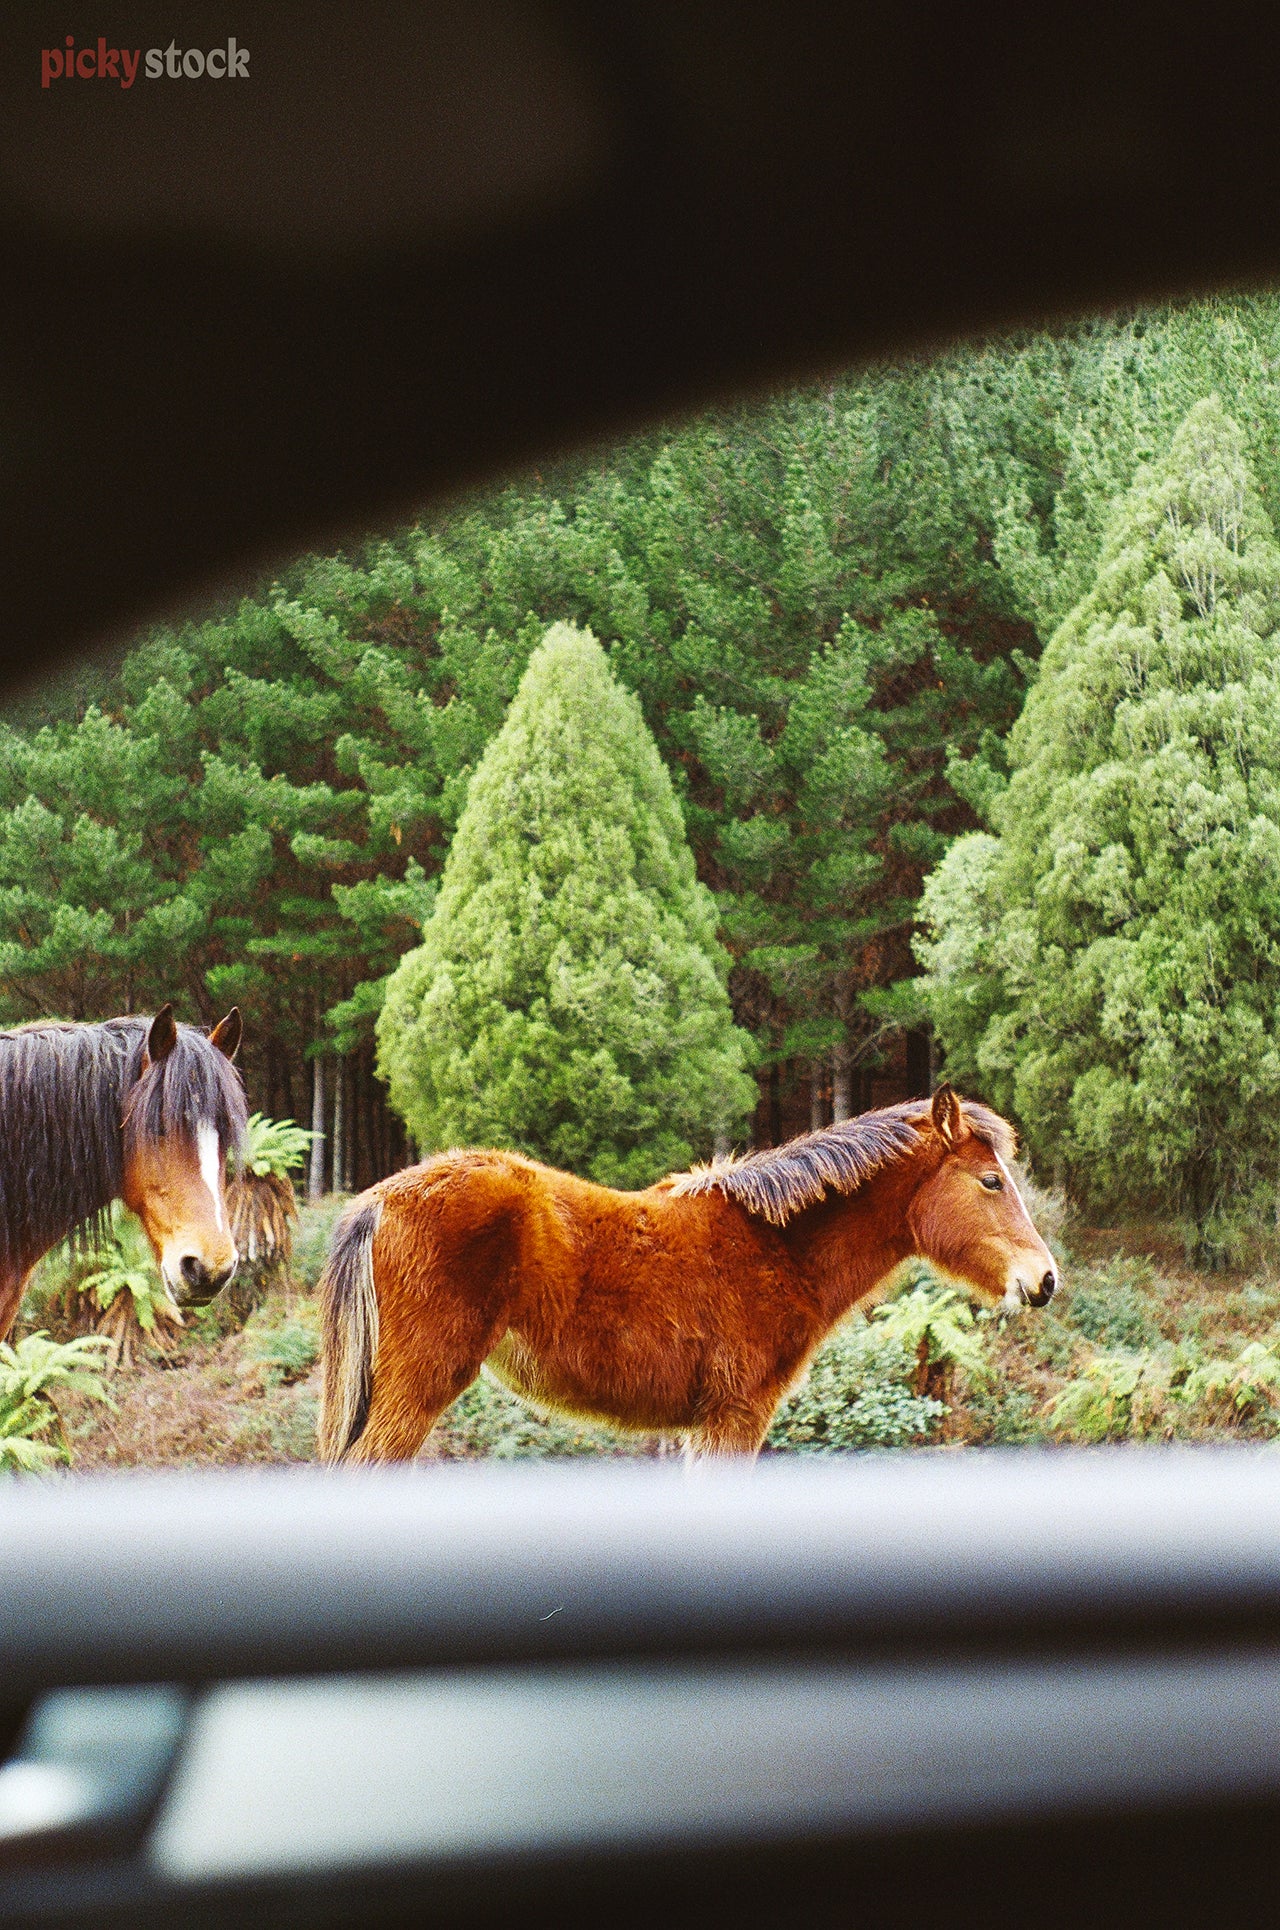 Gazing out from the drivers seat of a car,  towards two brown horses on the road to Lake Waikaremoana.